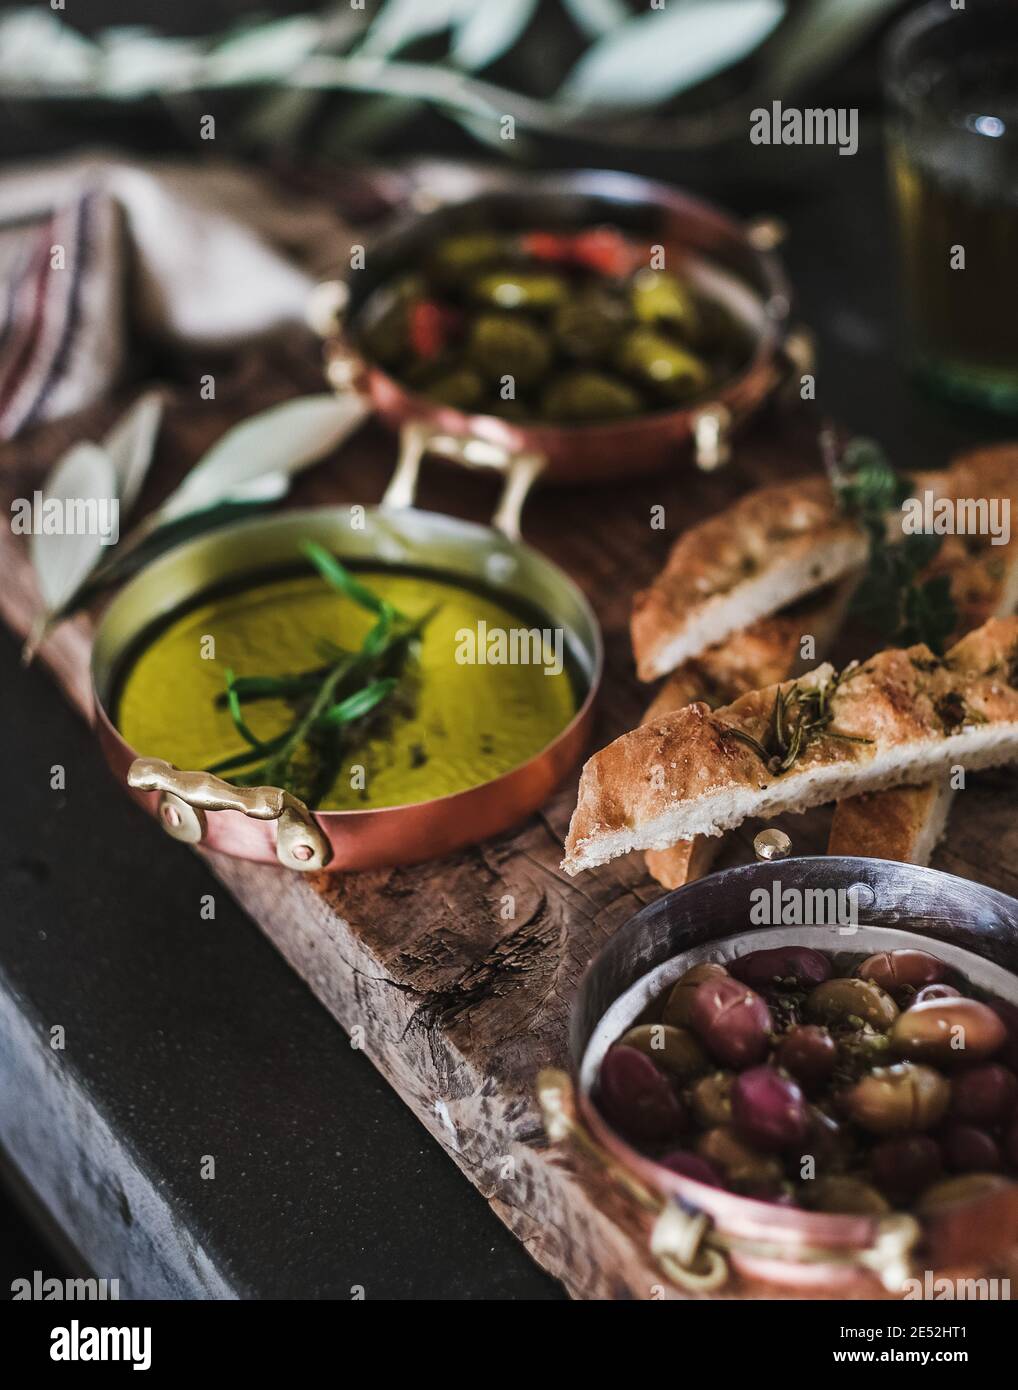 Pickled Greek olives, olive oil in copper jars and herbed focaccia slices on rustic wooden board, selective focus, close-up. Traditional Mediterranean meze appetizers platter Stock Photo